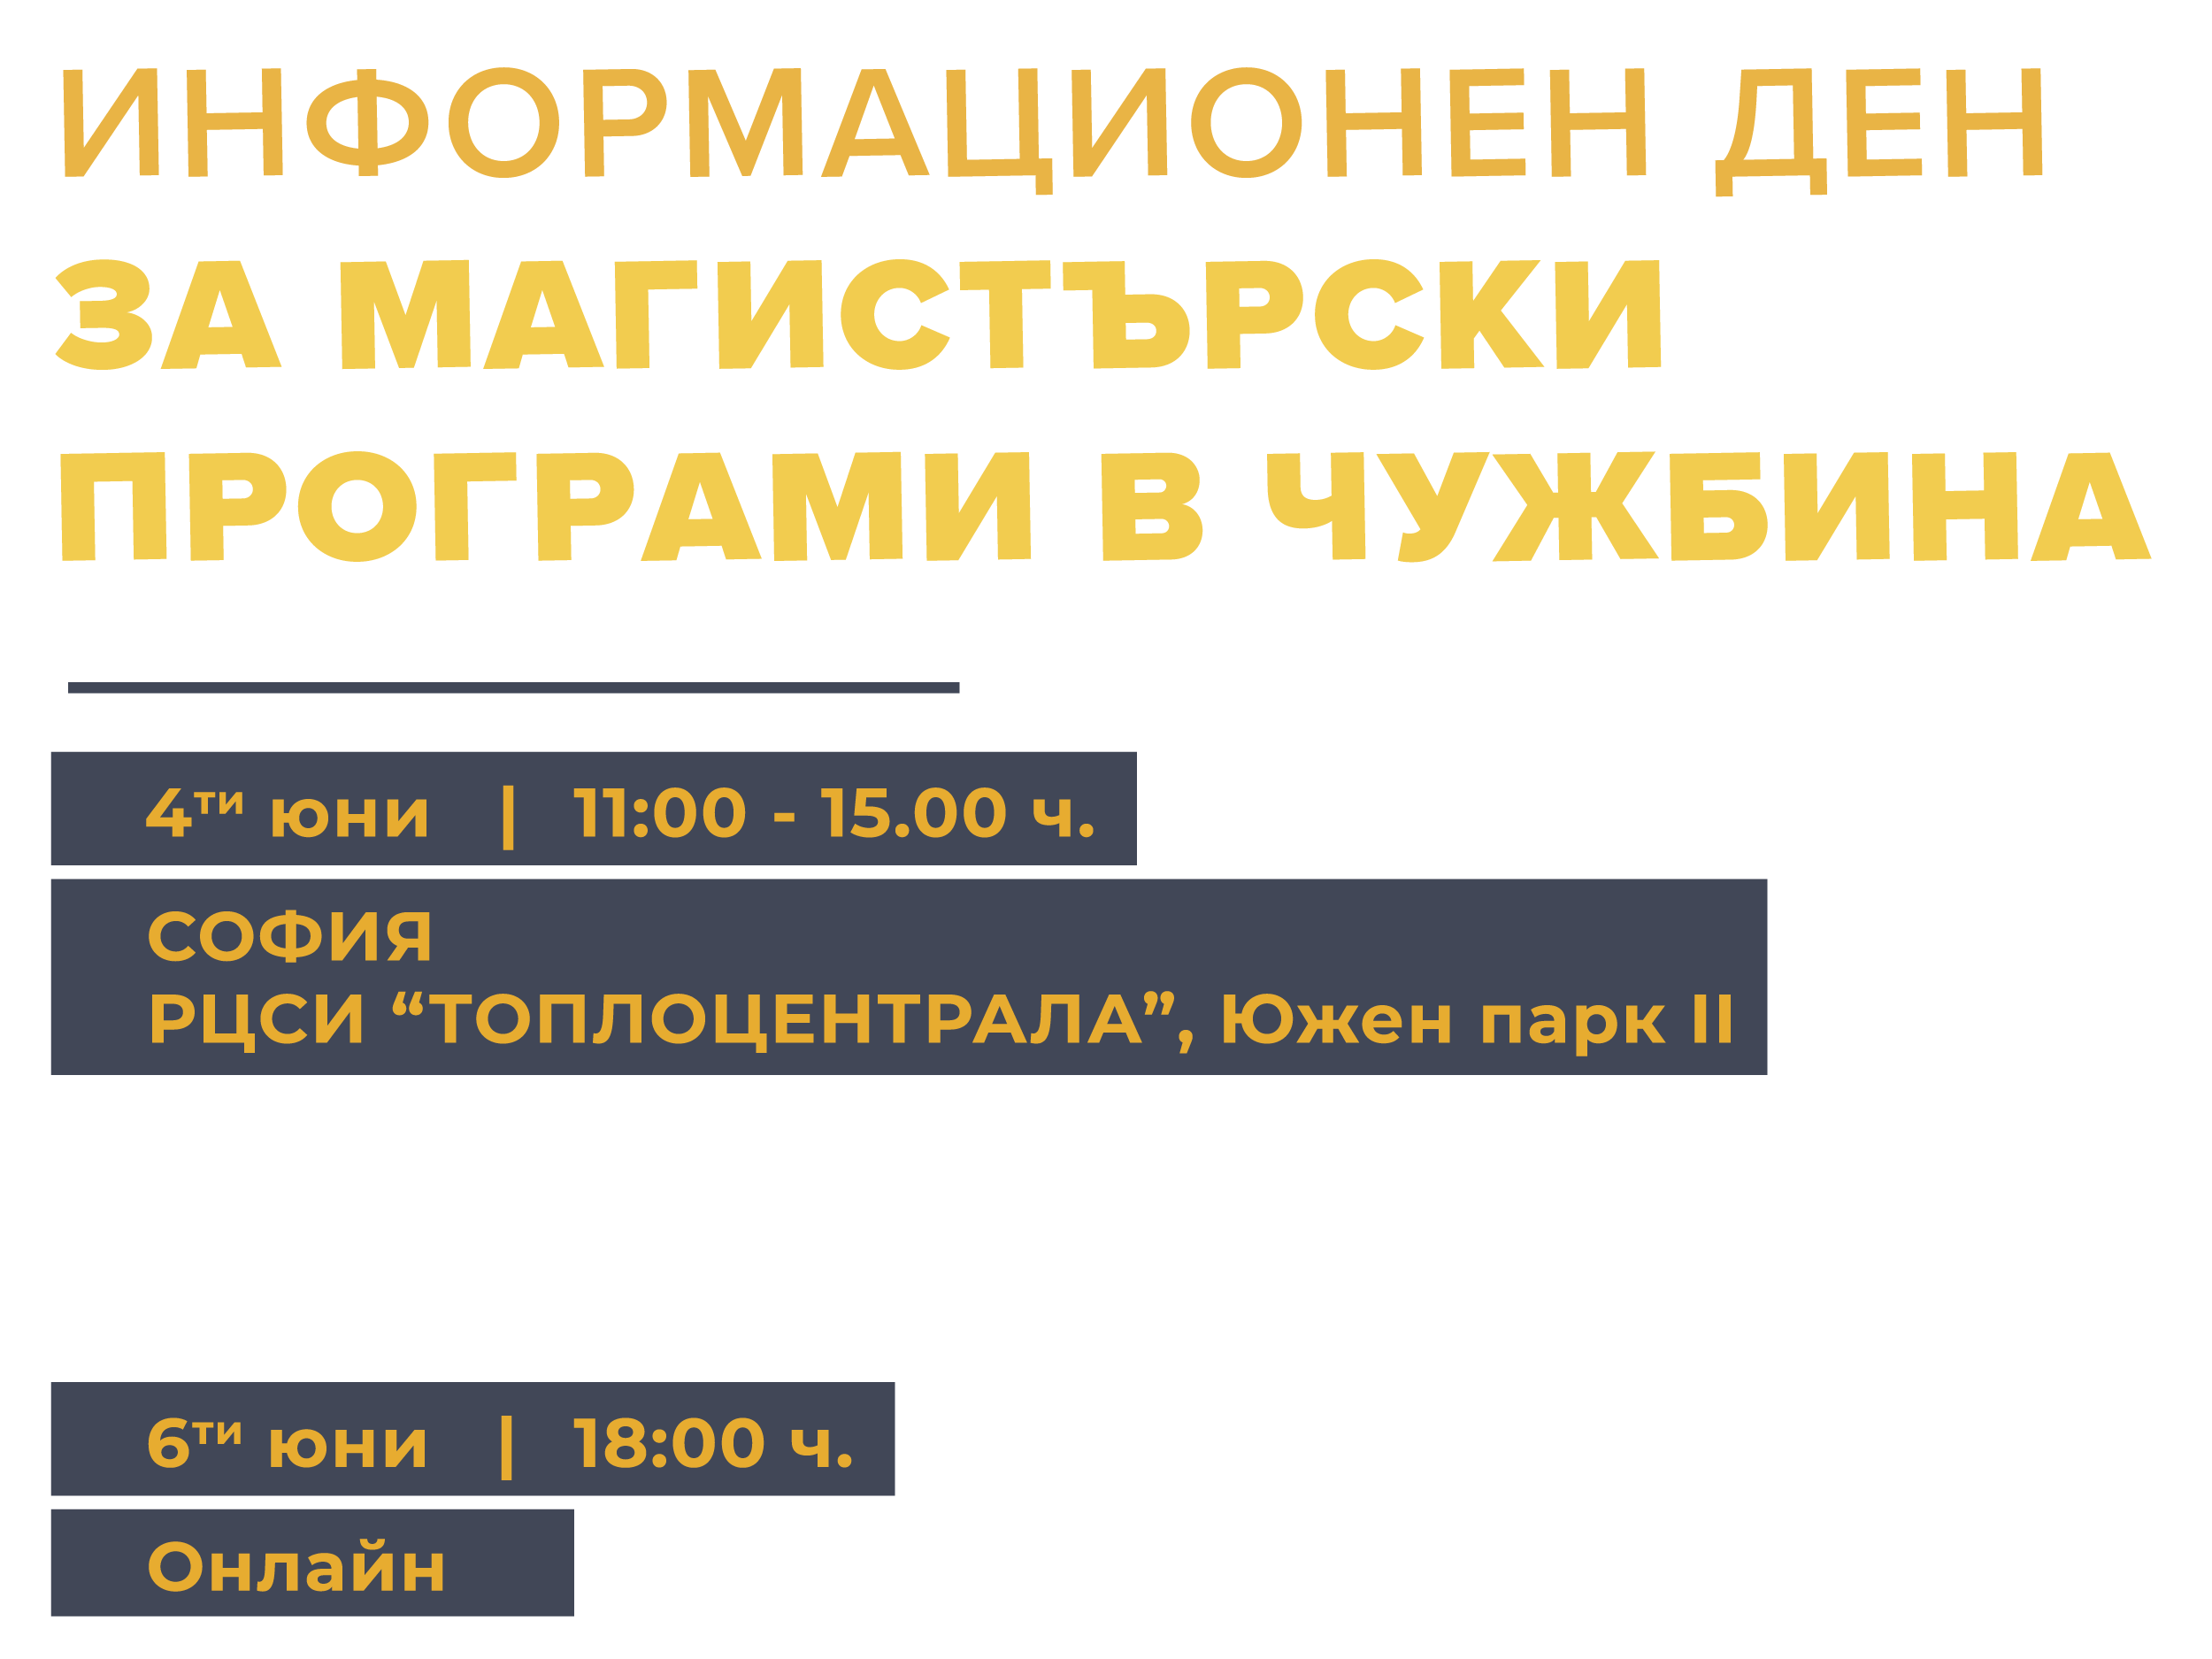 Text-MasteryourFuture-final-01